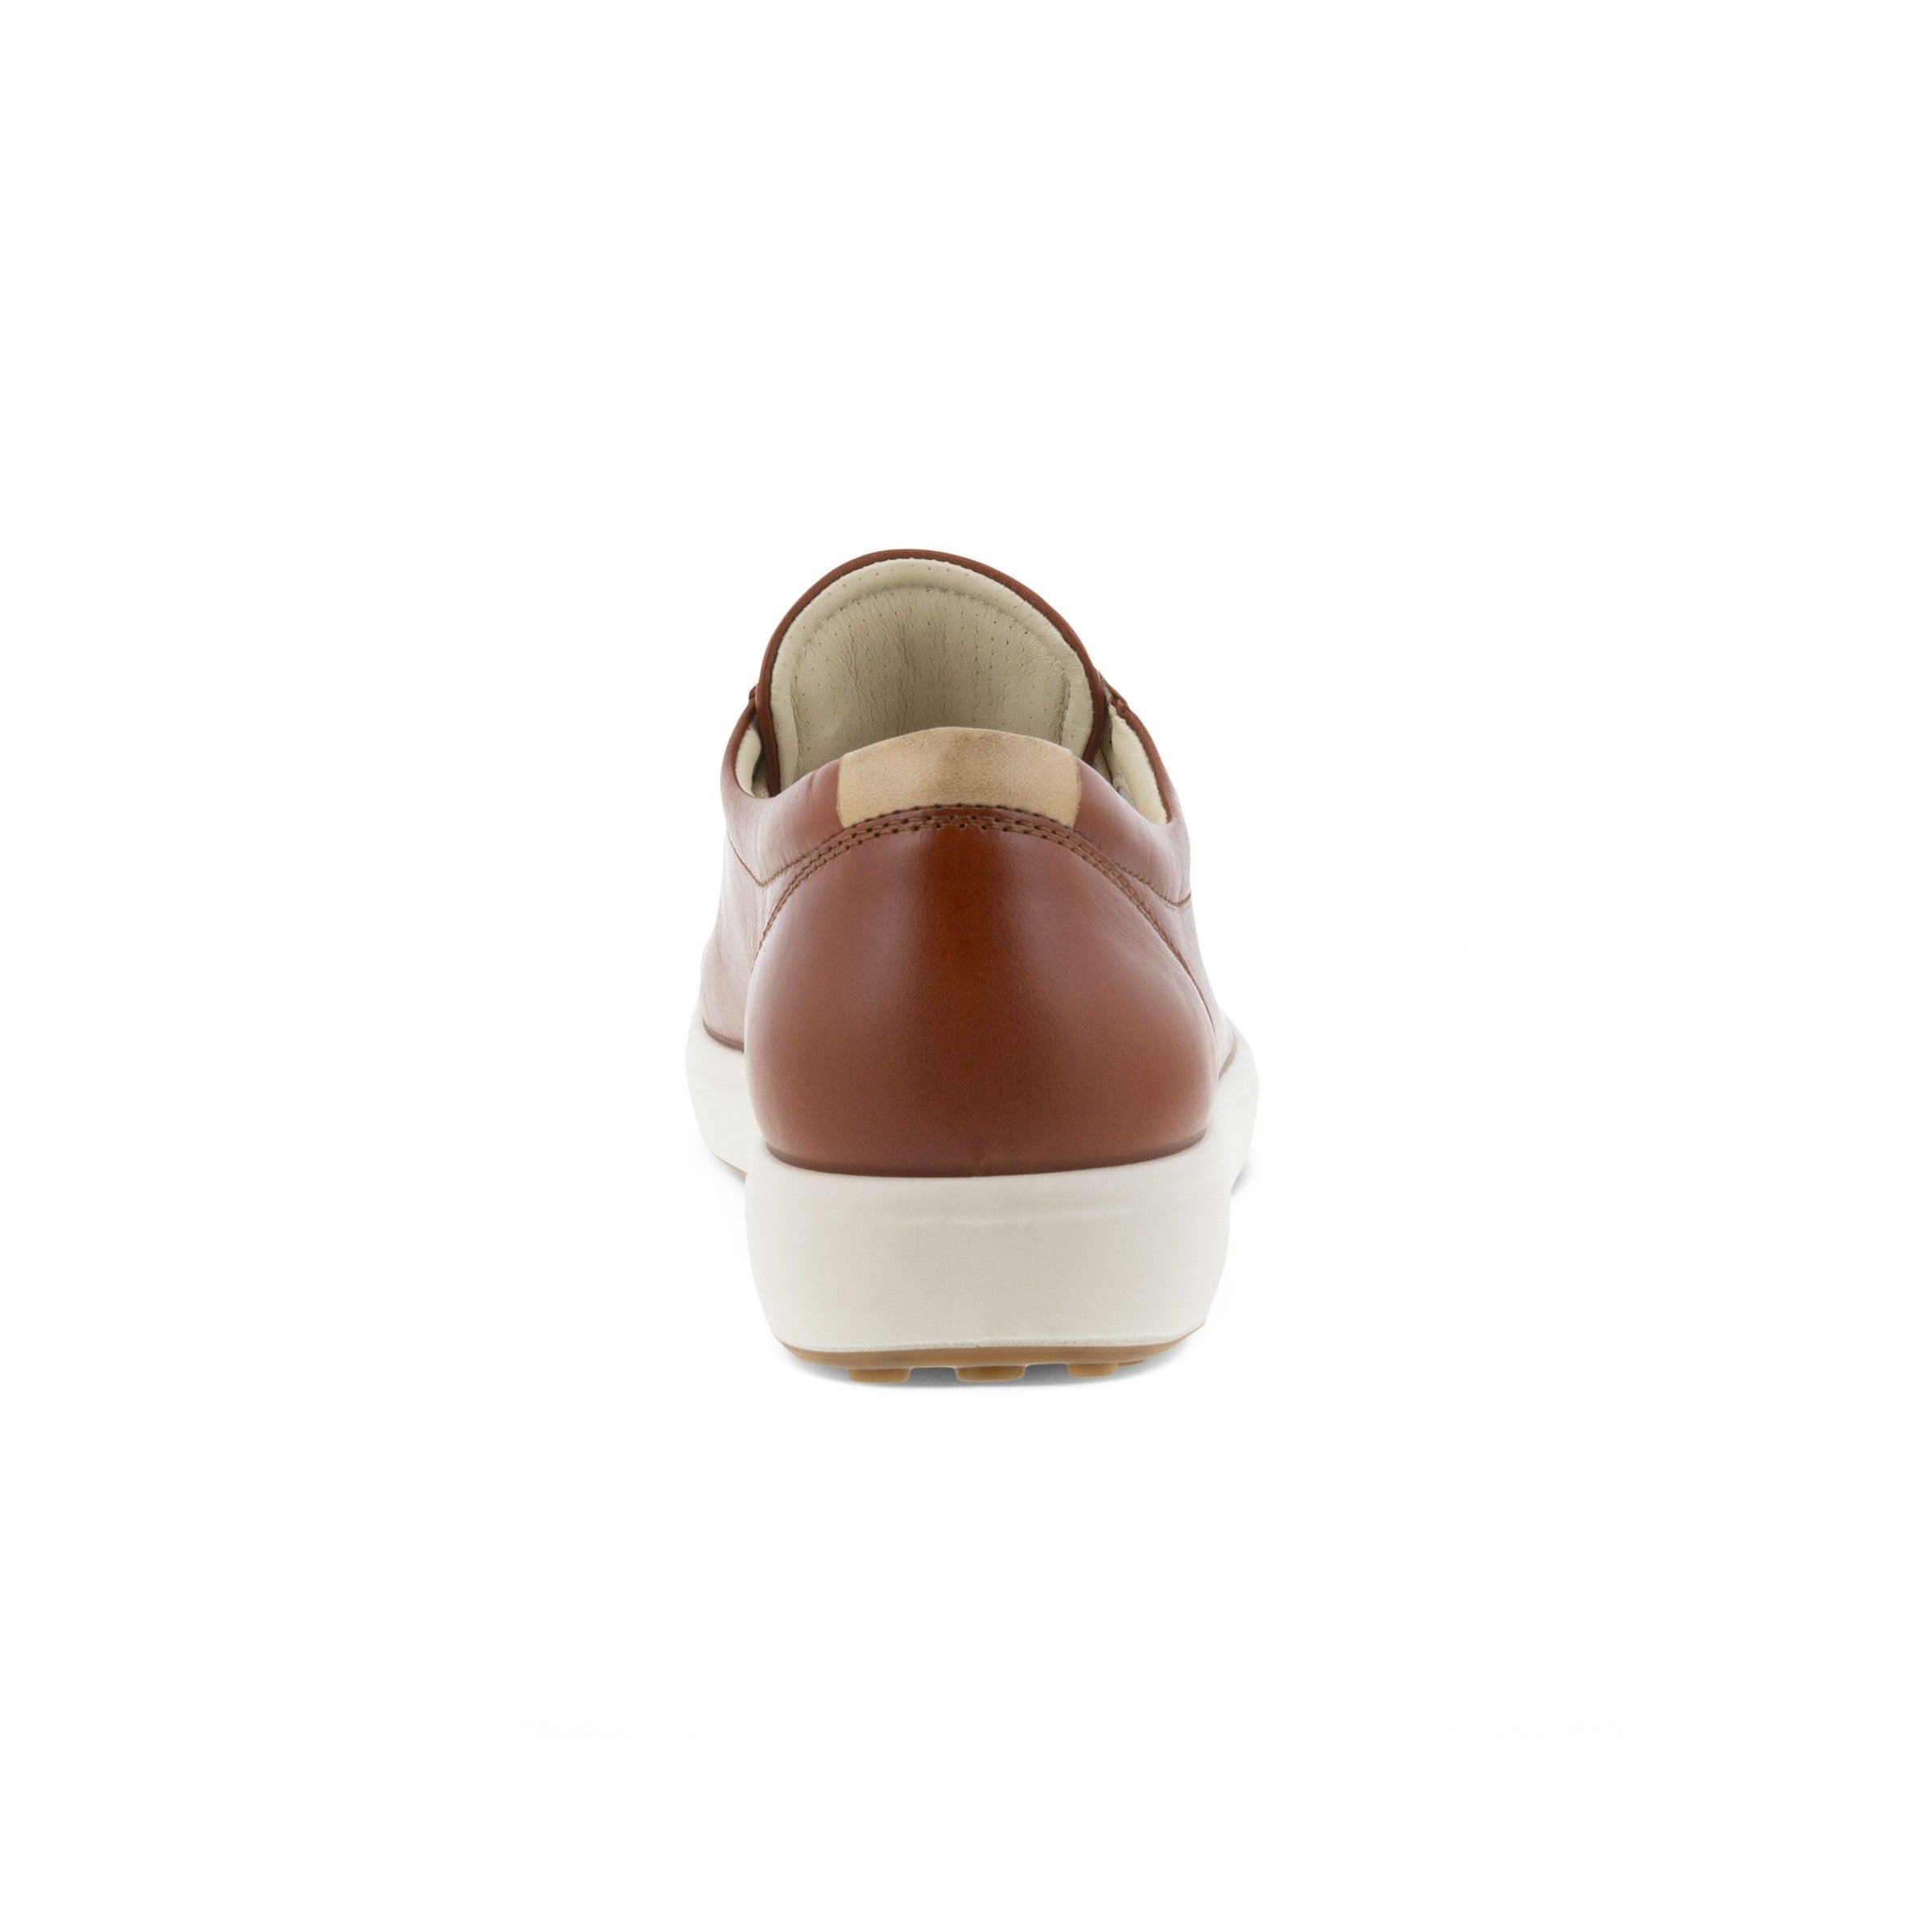 Ecco Soft 7 430003 01053 Ladies Cognac Leather Arch Support Lace Up Shoes